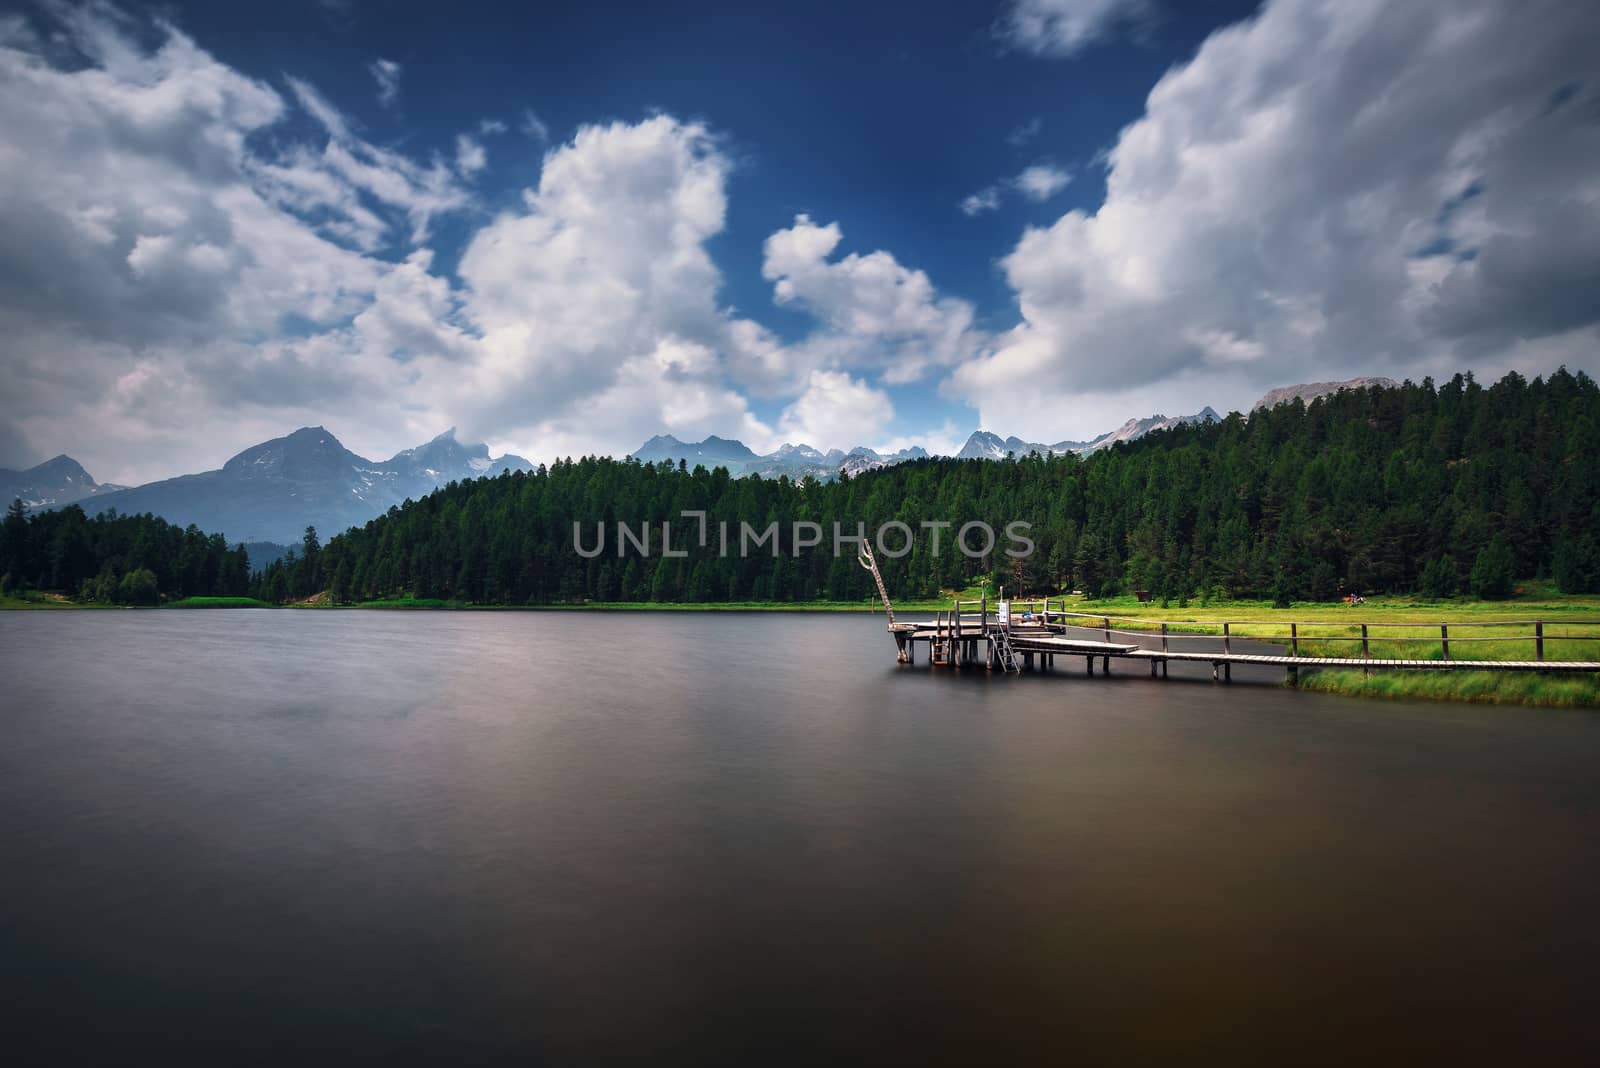 Footbridge over the Lake of Staz near St. Moritz in Switzerland with Swiss Alps in the background. This lake is also known as Stazersee and Lej da Staz. Long exposure.